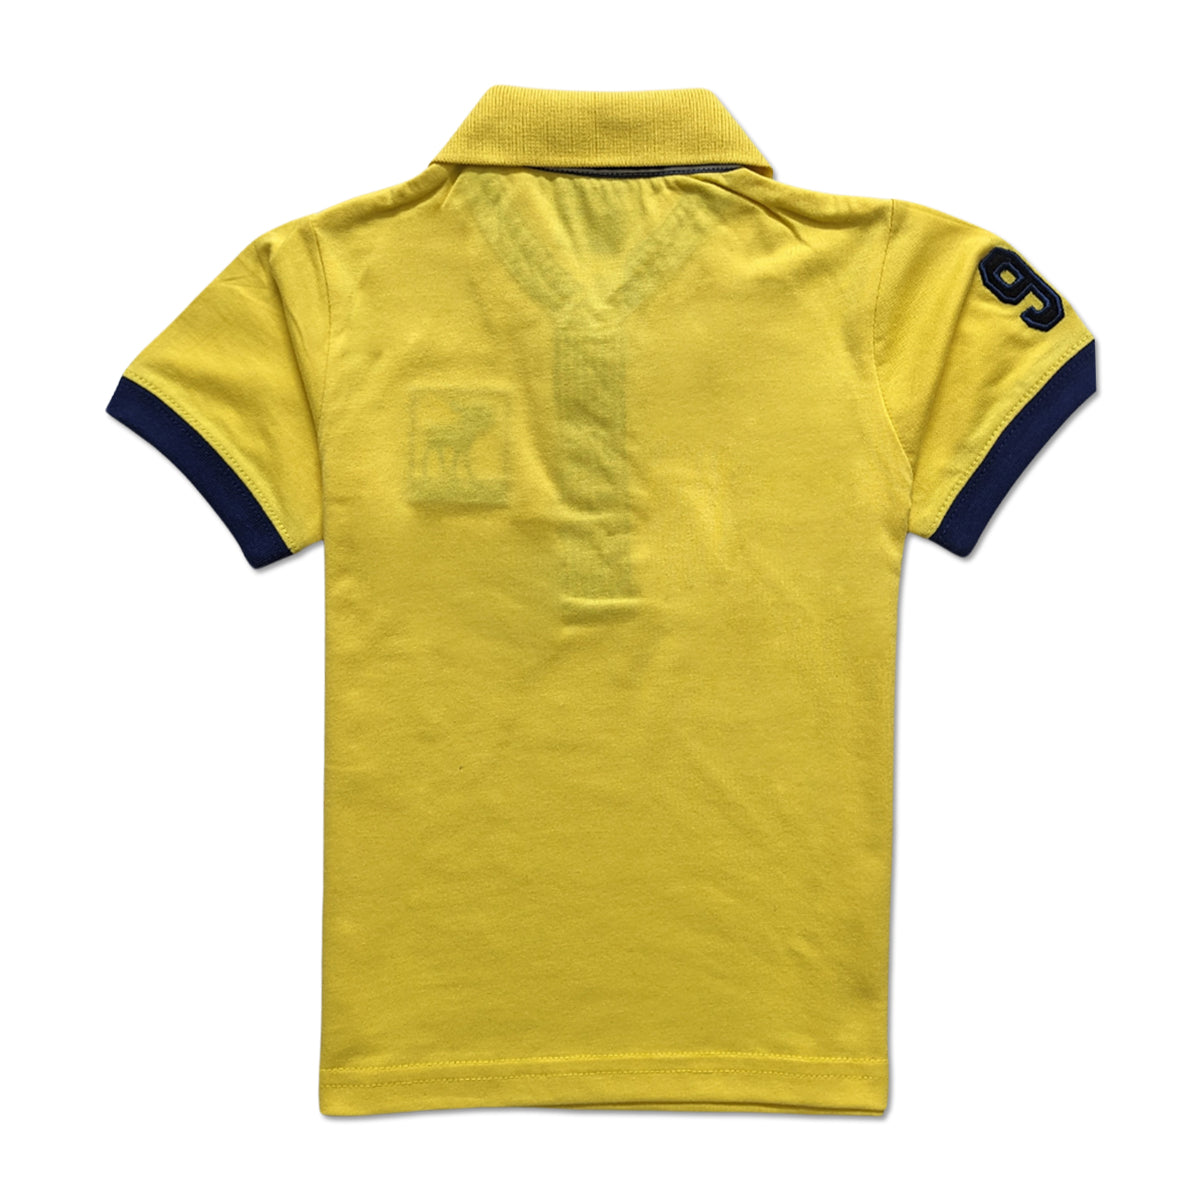 Brand Expo Premium Quality Branded Half Sleeves Polo for Boy's